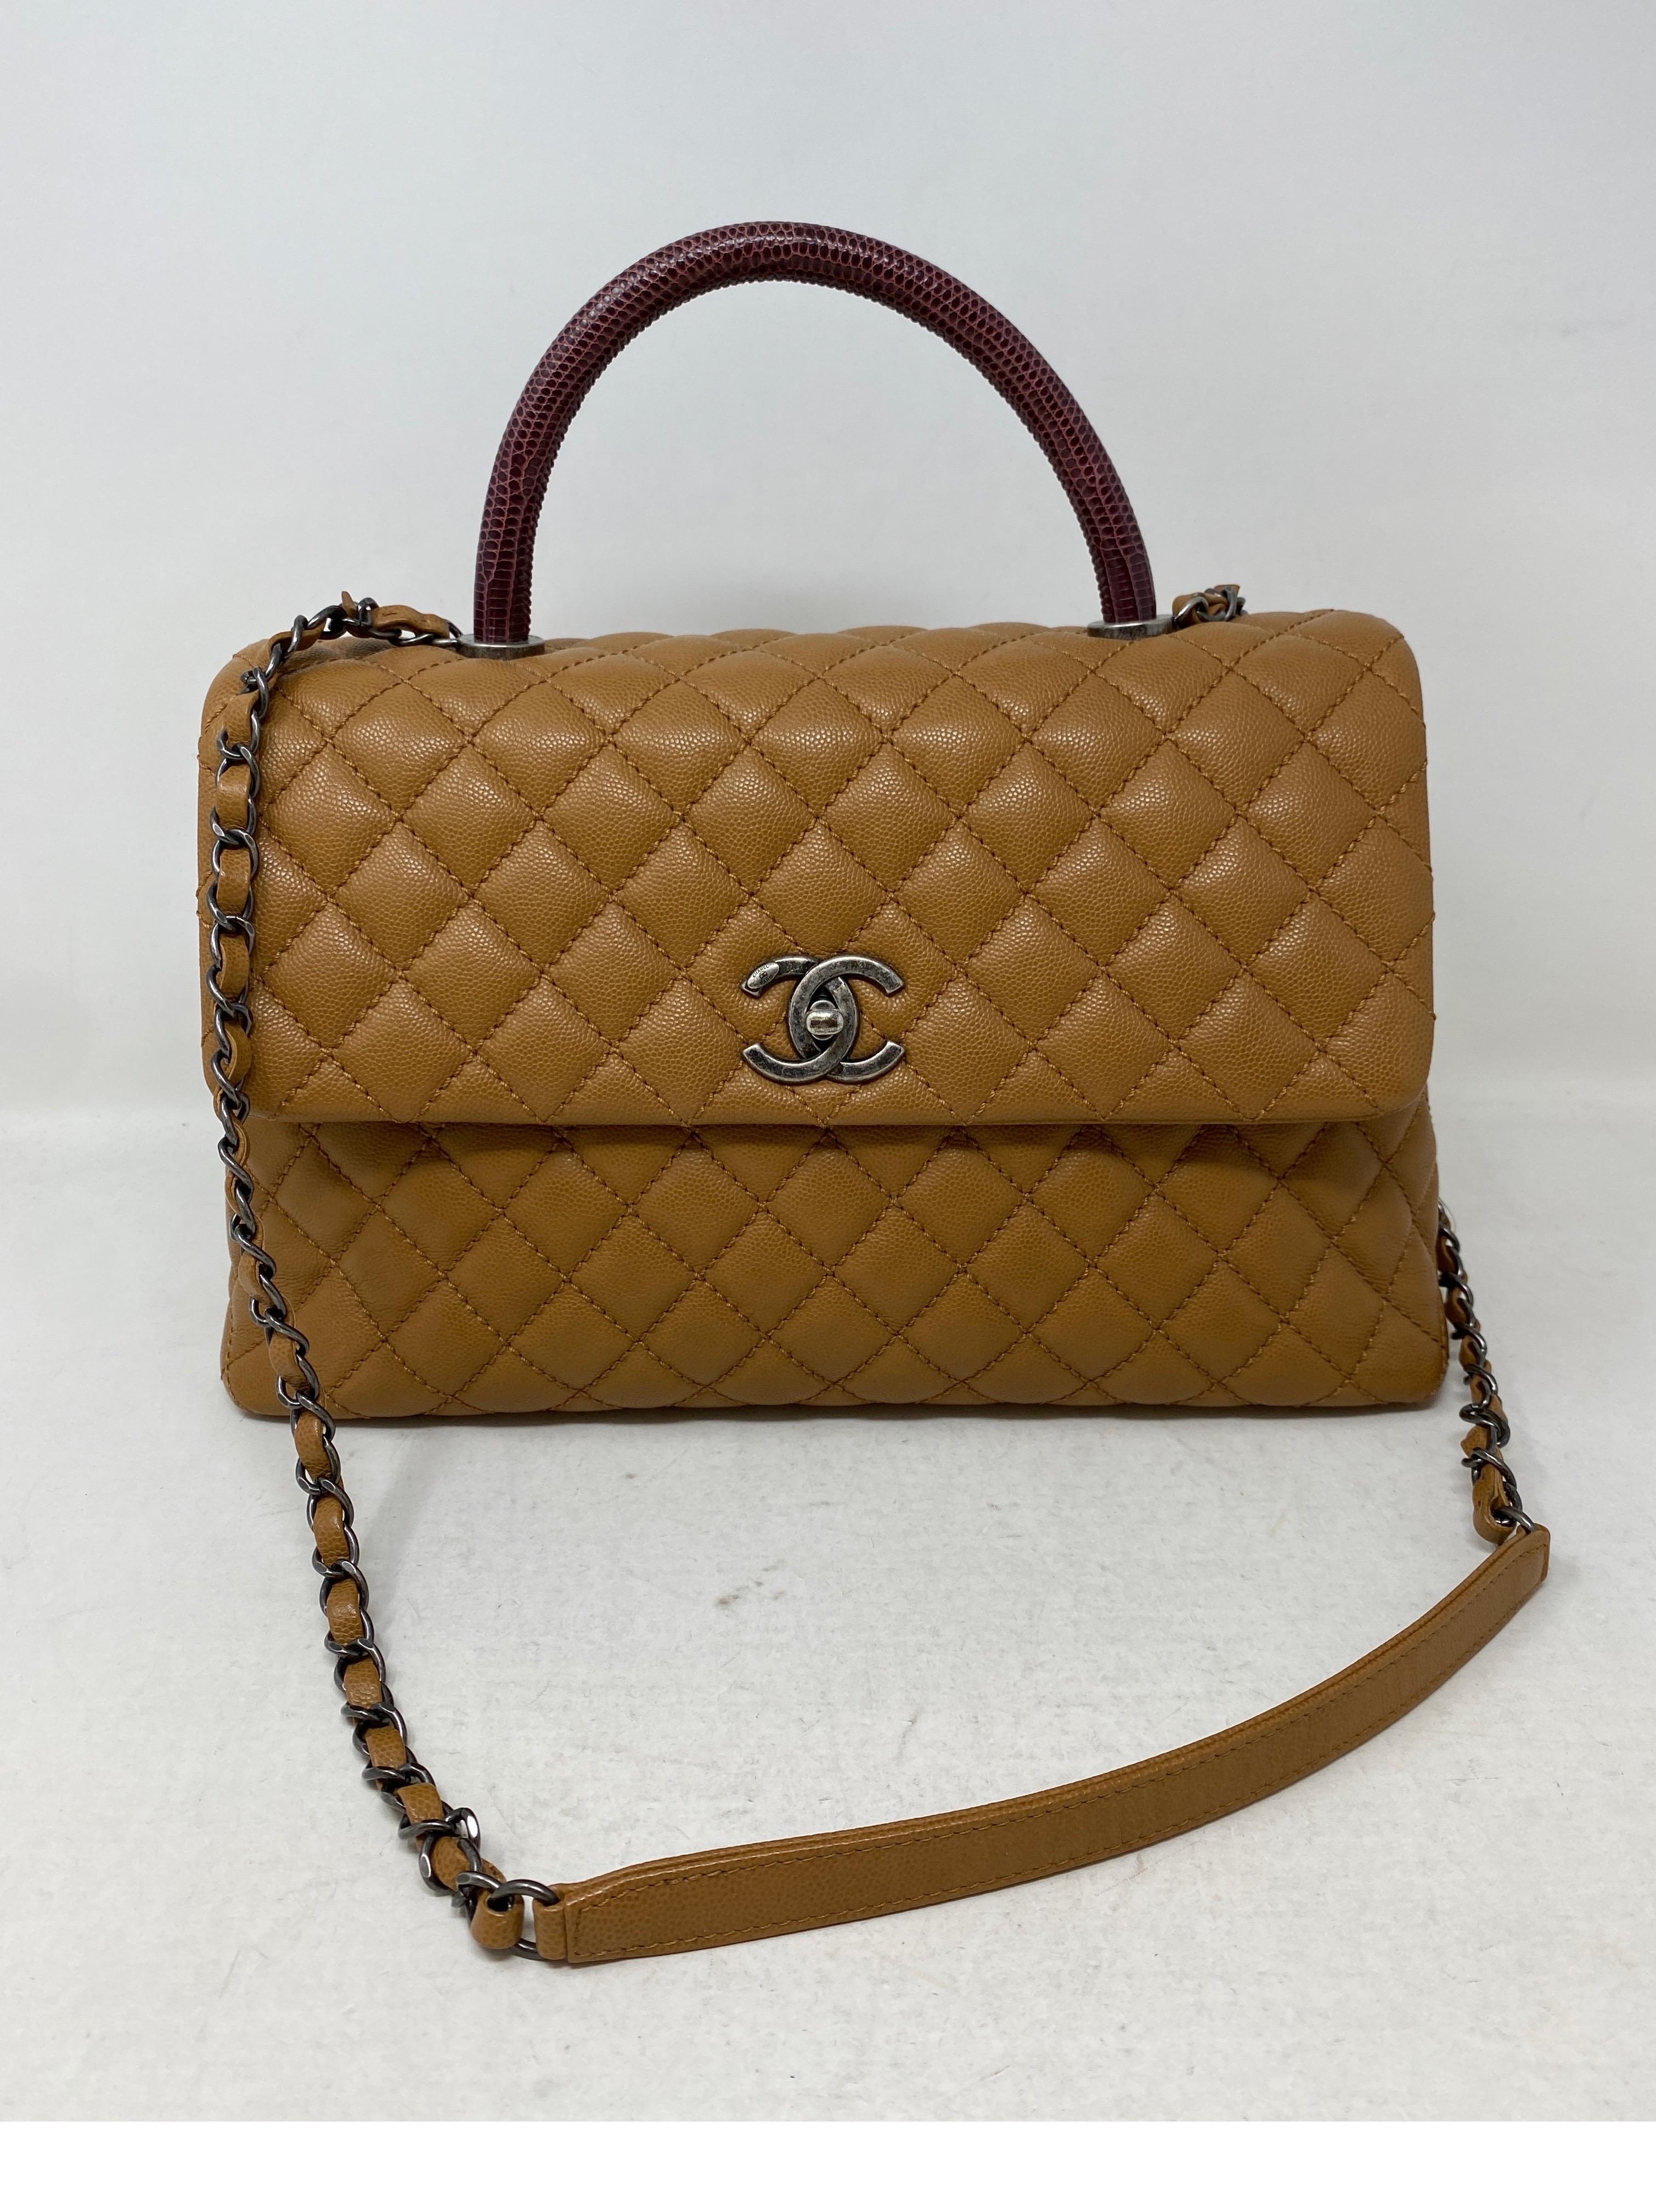 Chanel Coco Lizard Handle Bag. Tan leather bag with ruthenium hardware. Burgundy Lizard handle bag. Excellent like new condition. Rare combination bag. Includes authenticity card and dust cover. Guaranteed authentic. 